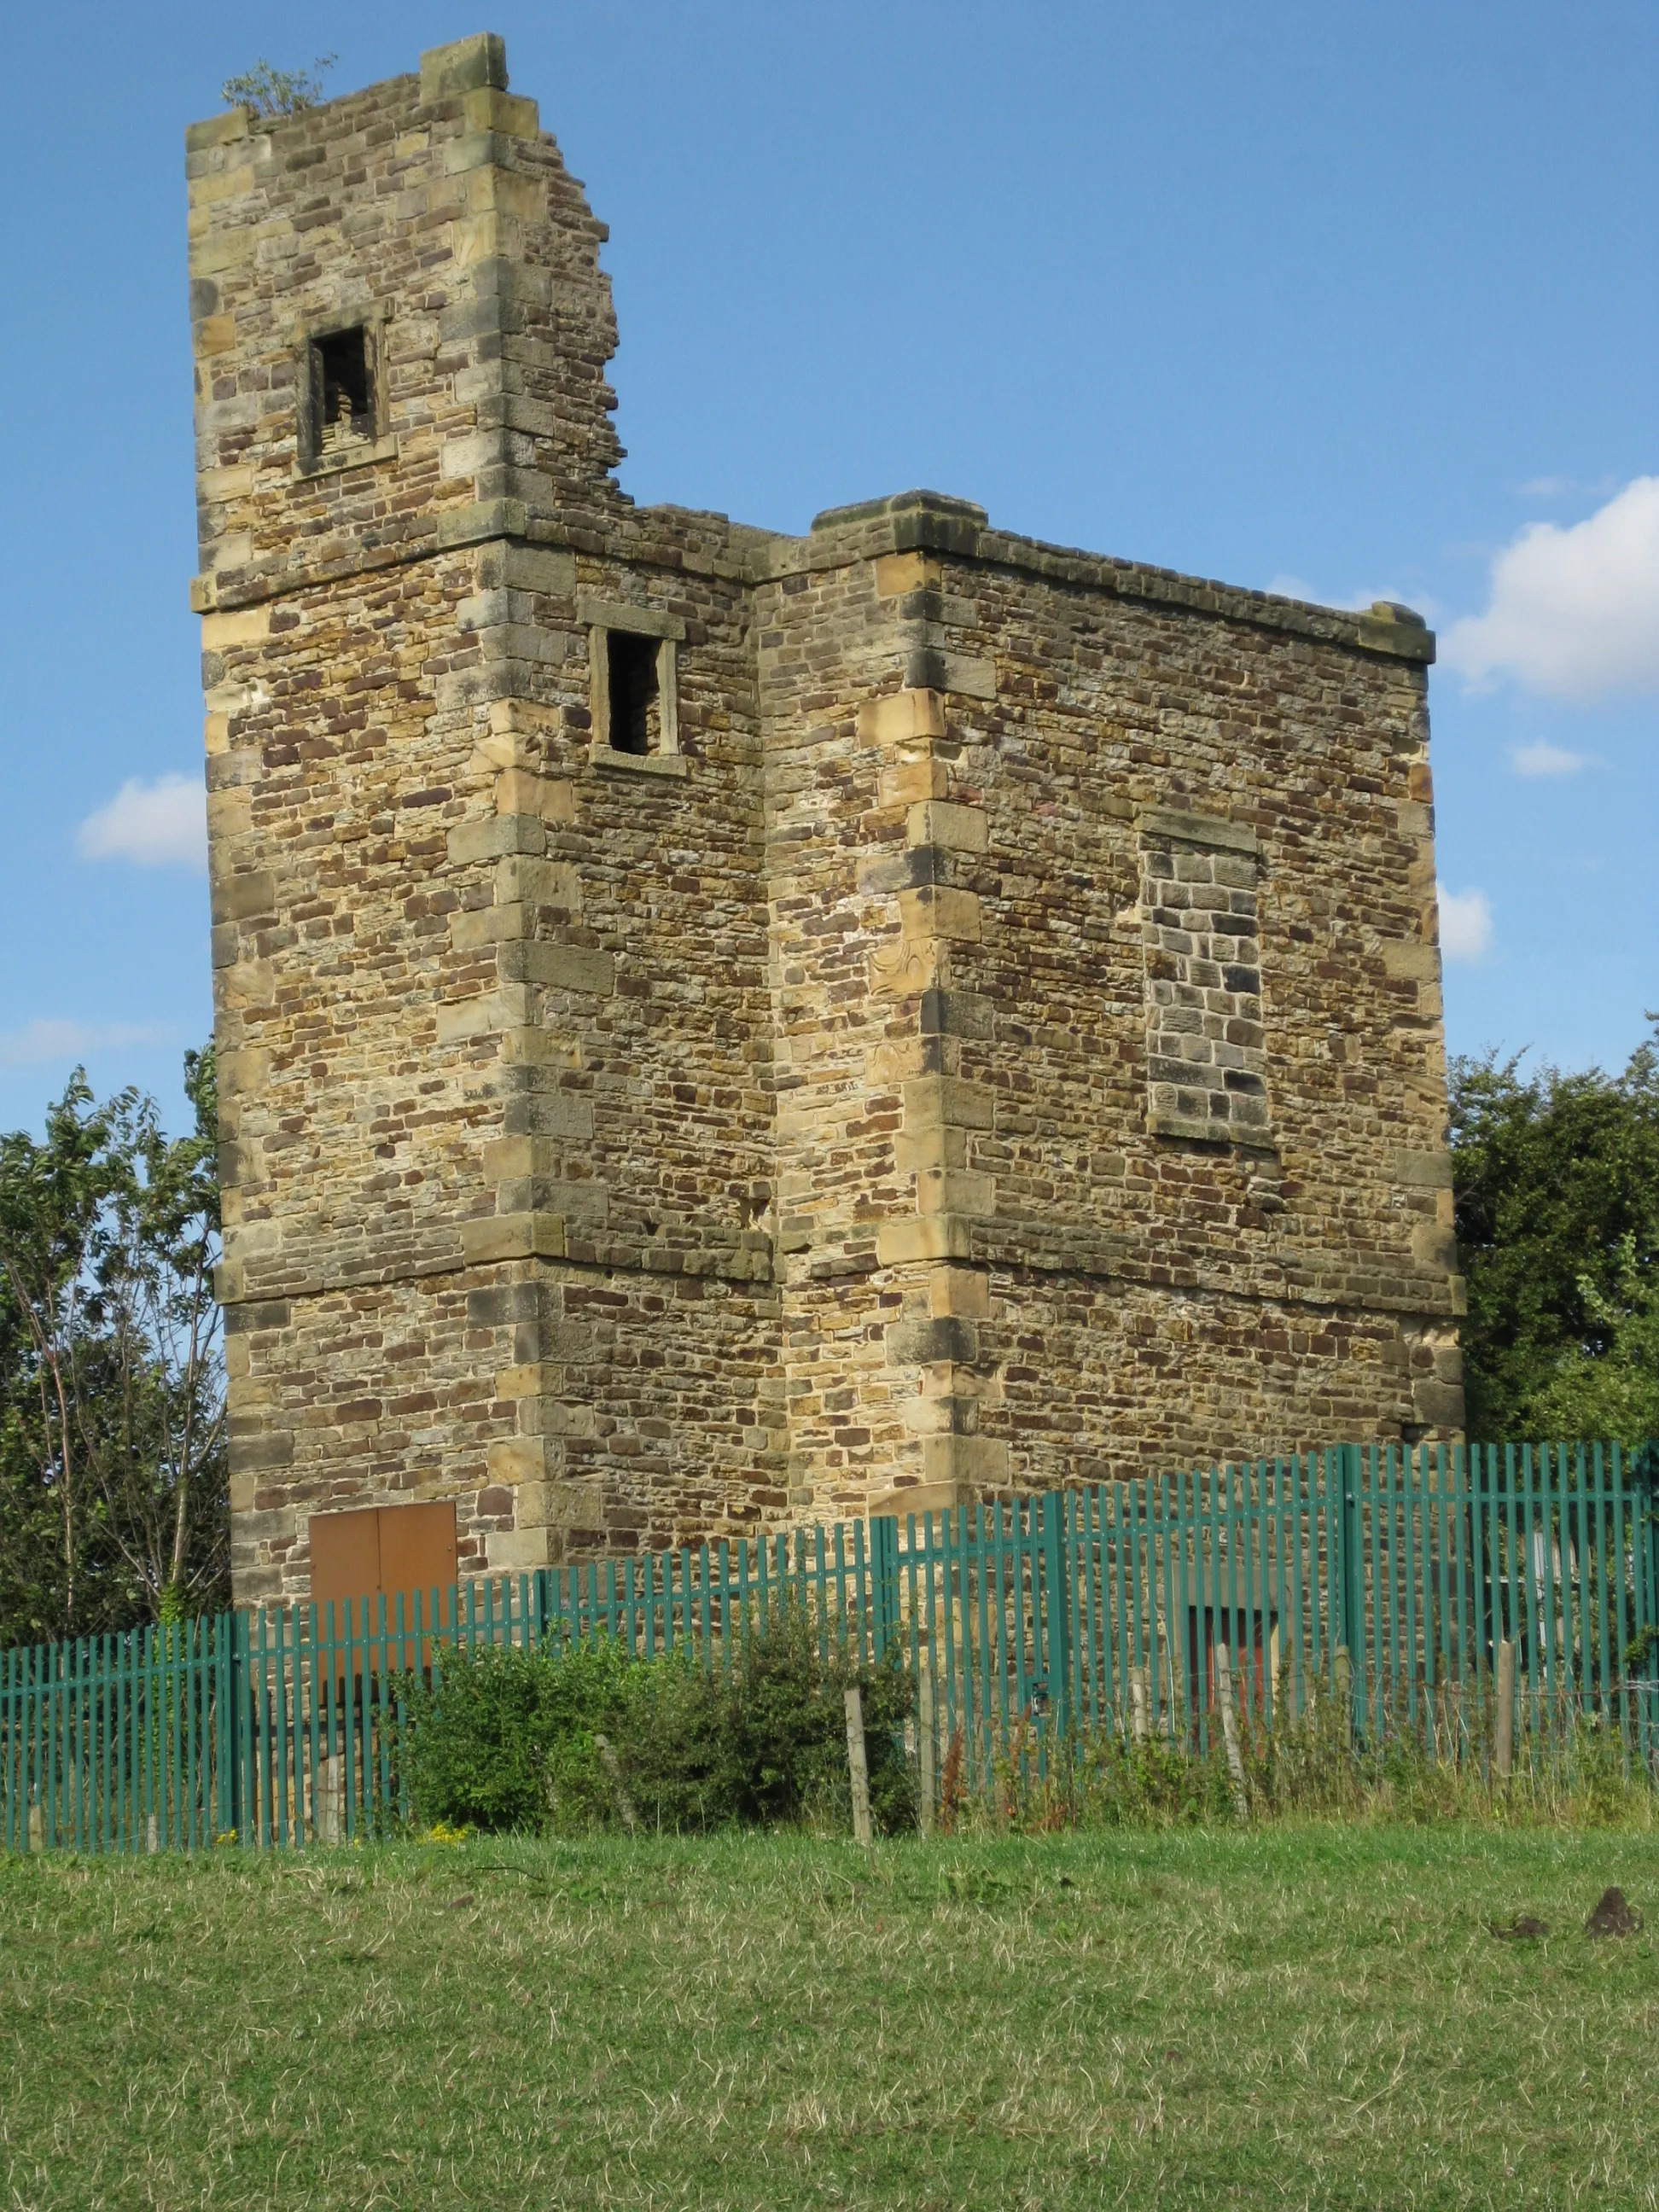 Photo showing: Lowe Stand, Nether Hawshaw Lane, Hoyland, South Yorkshire. Built about 1750, probably as a hunting lodge and lookout. Now partly ruined.